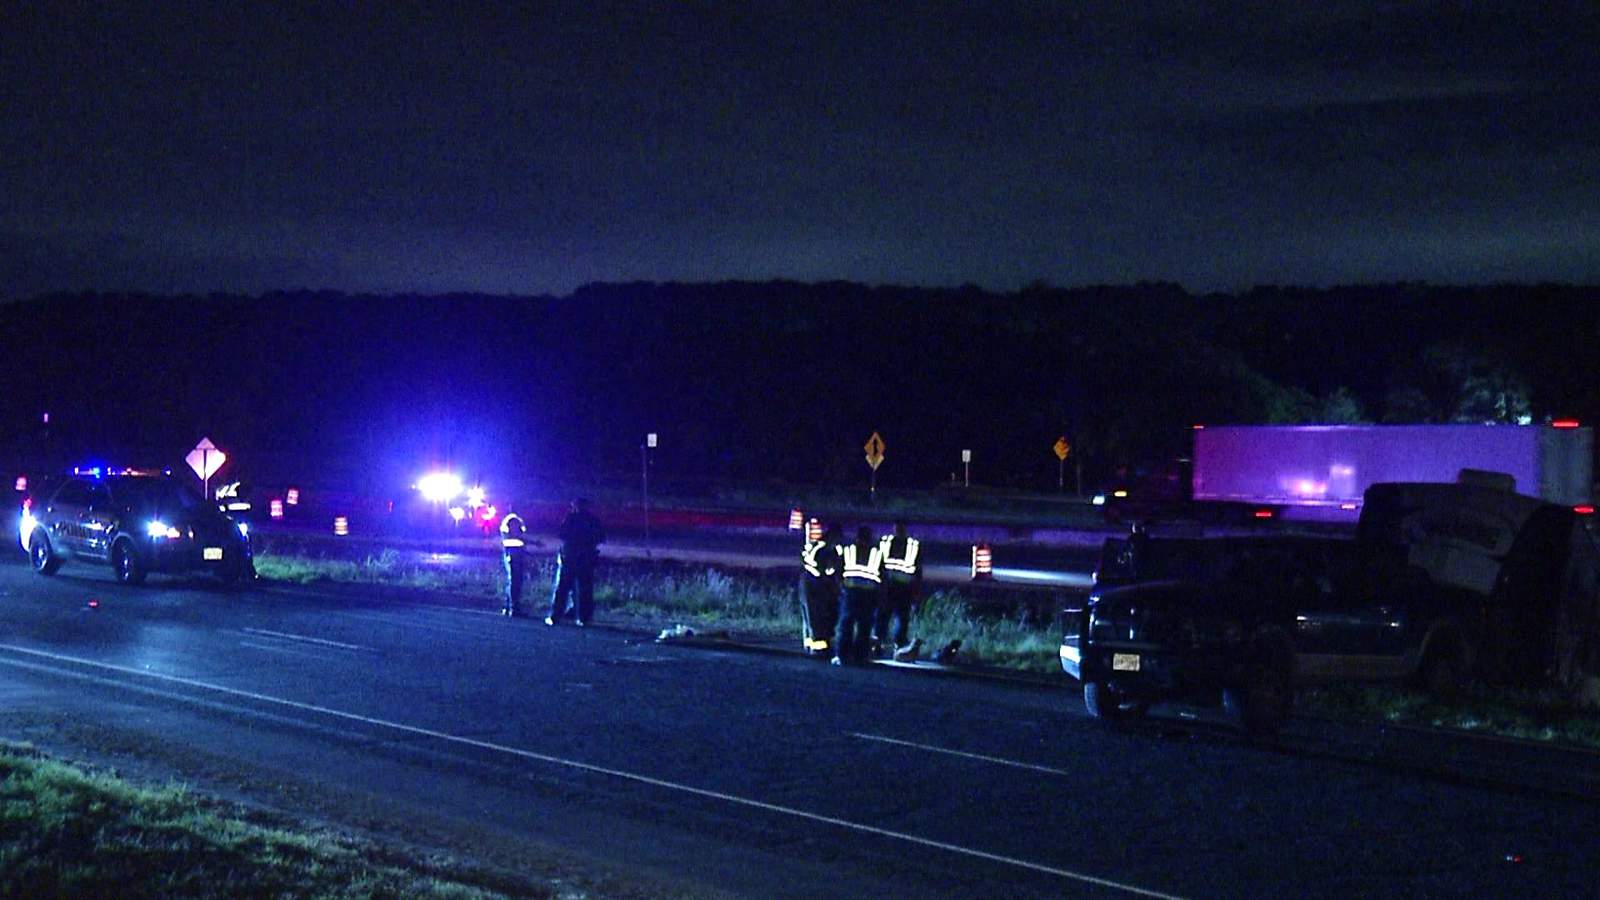 Driver of pickup truck fatally shot while traveling on Loop 1604, police say